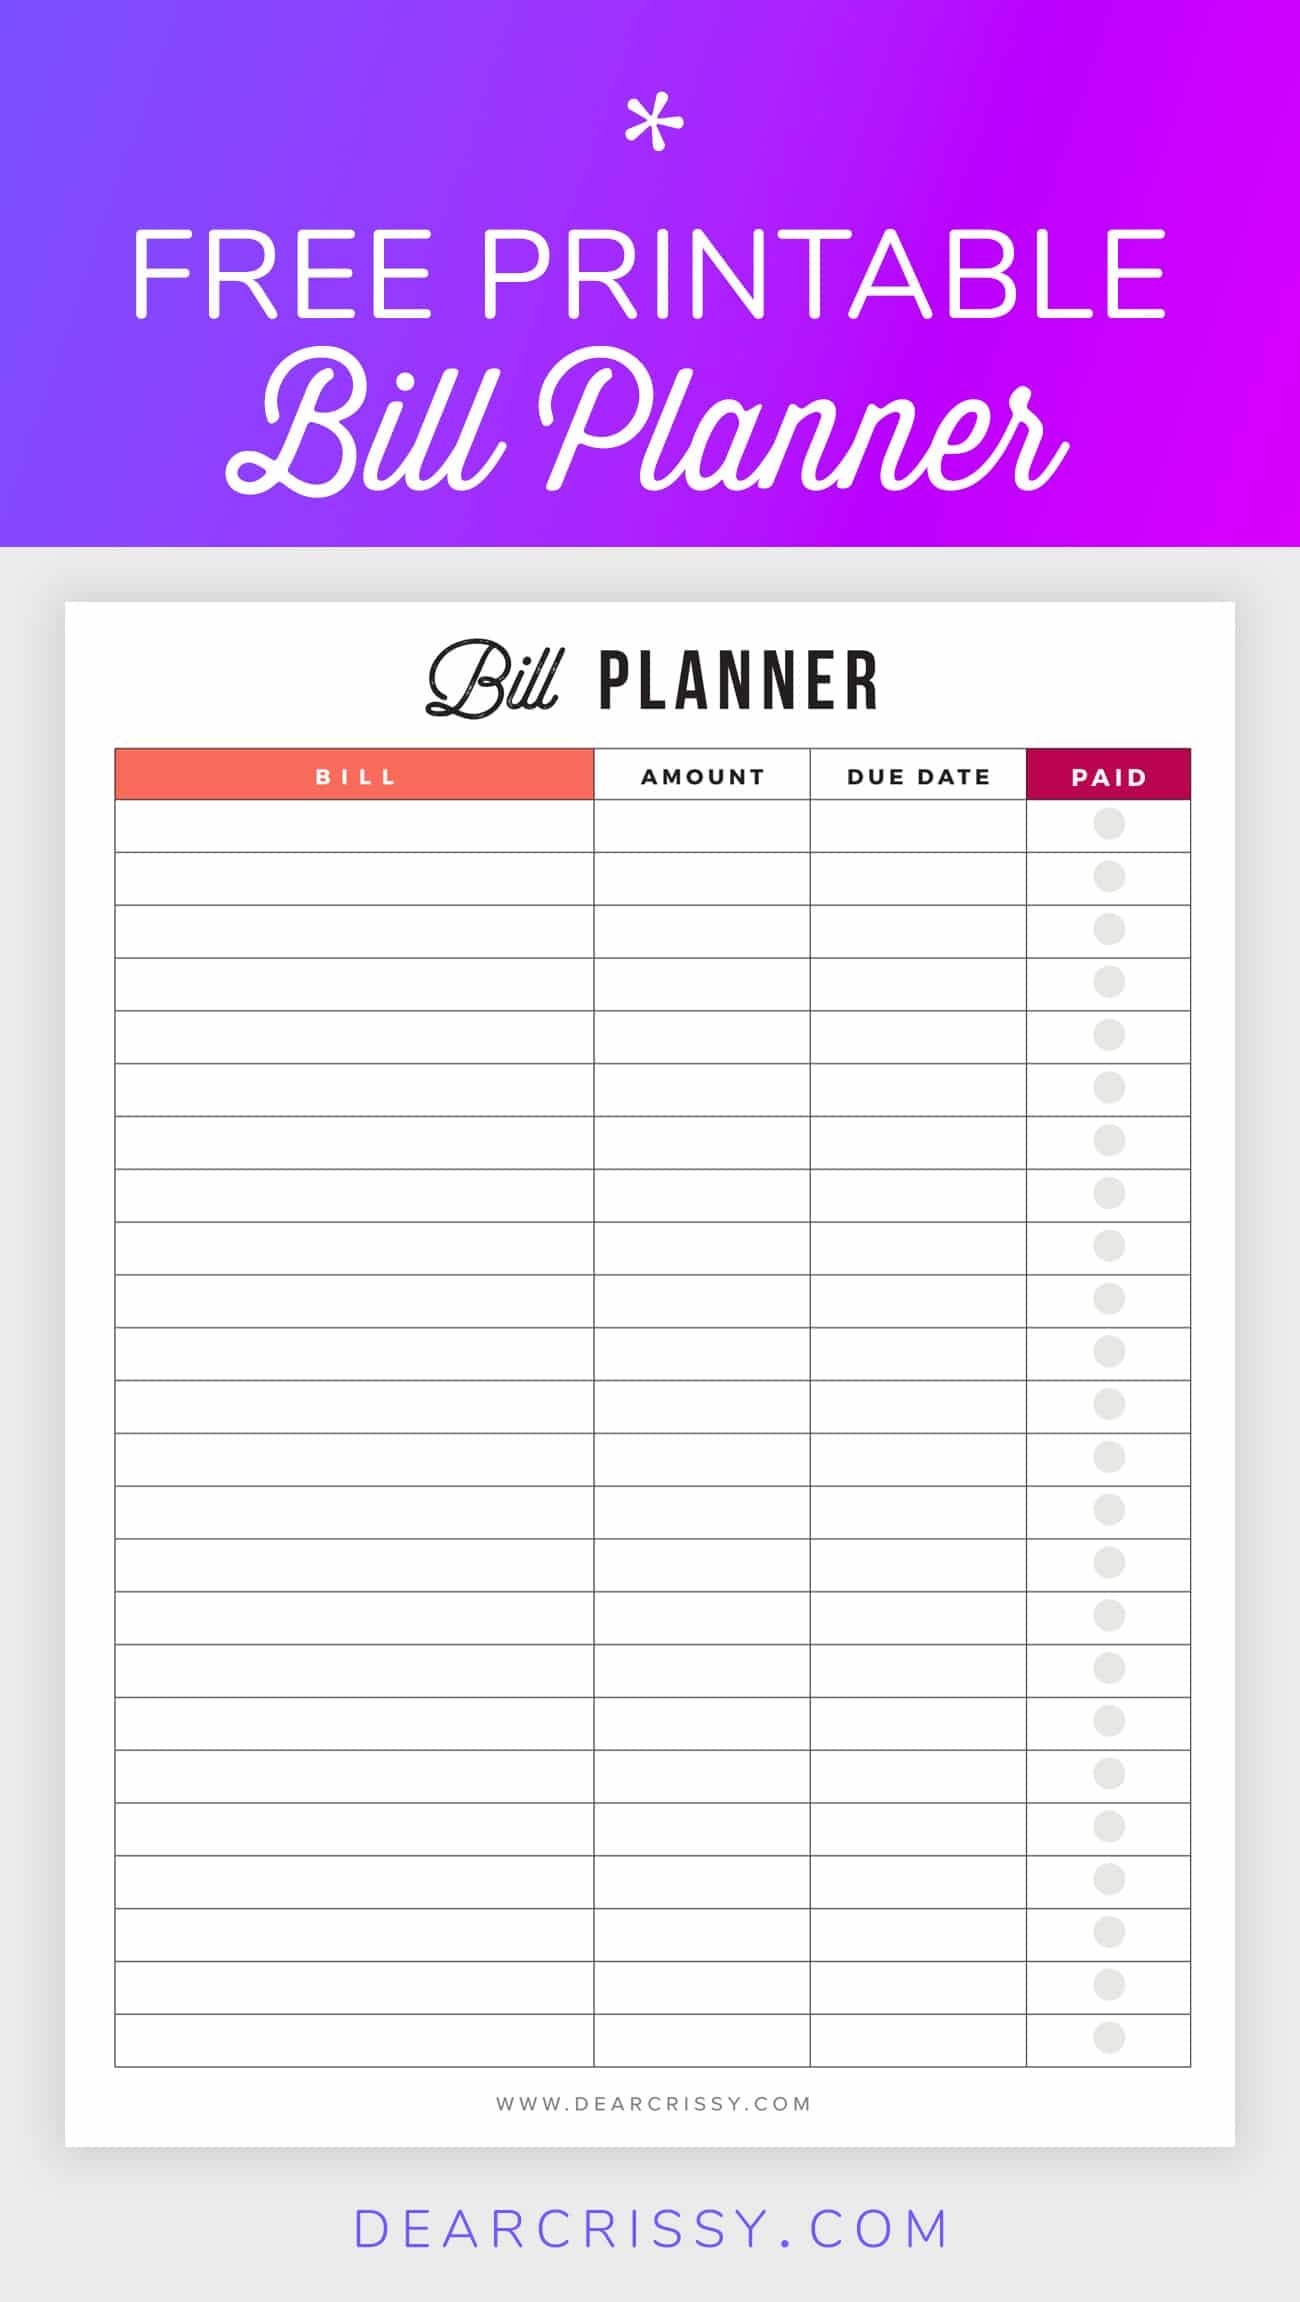 Bill Planner Printable - Pay Down Your Bills This Year!  Printable Monthly Bill Pay